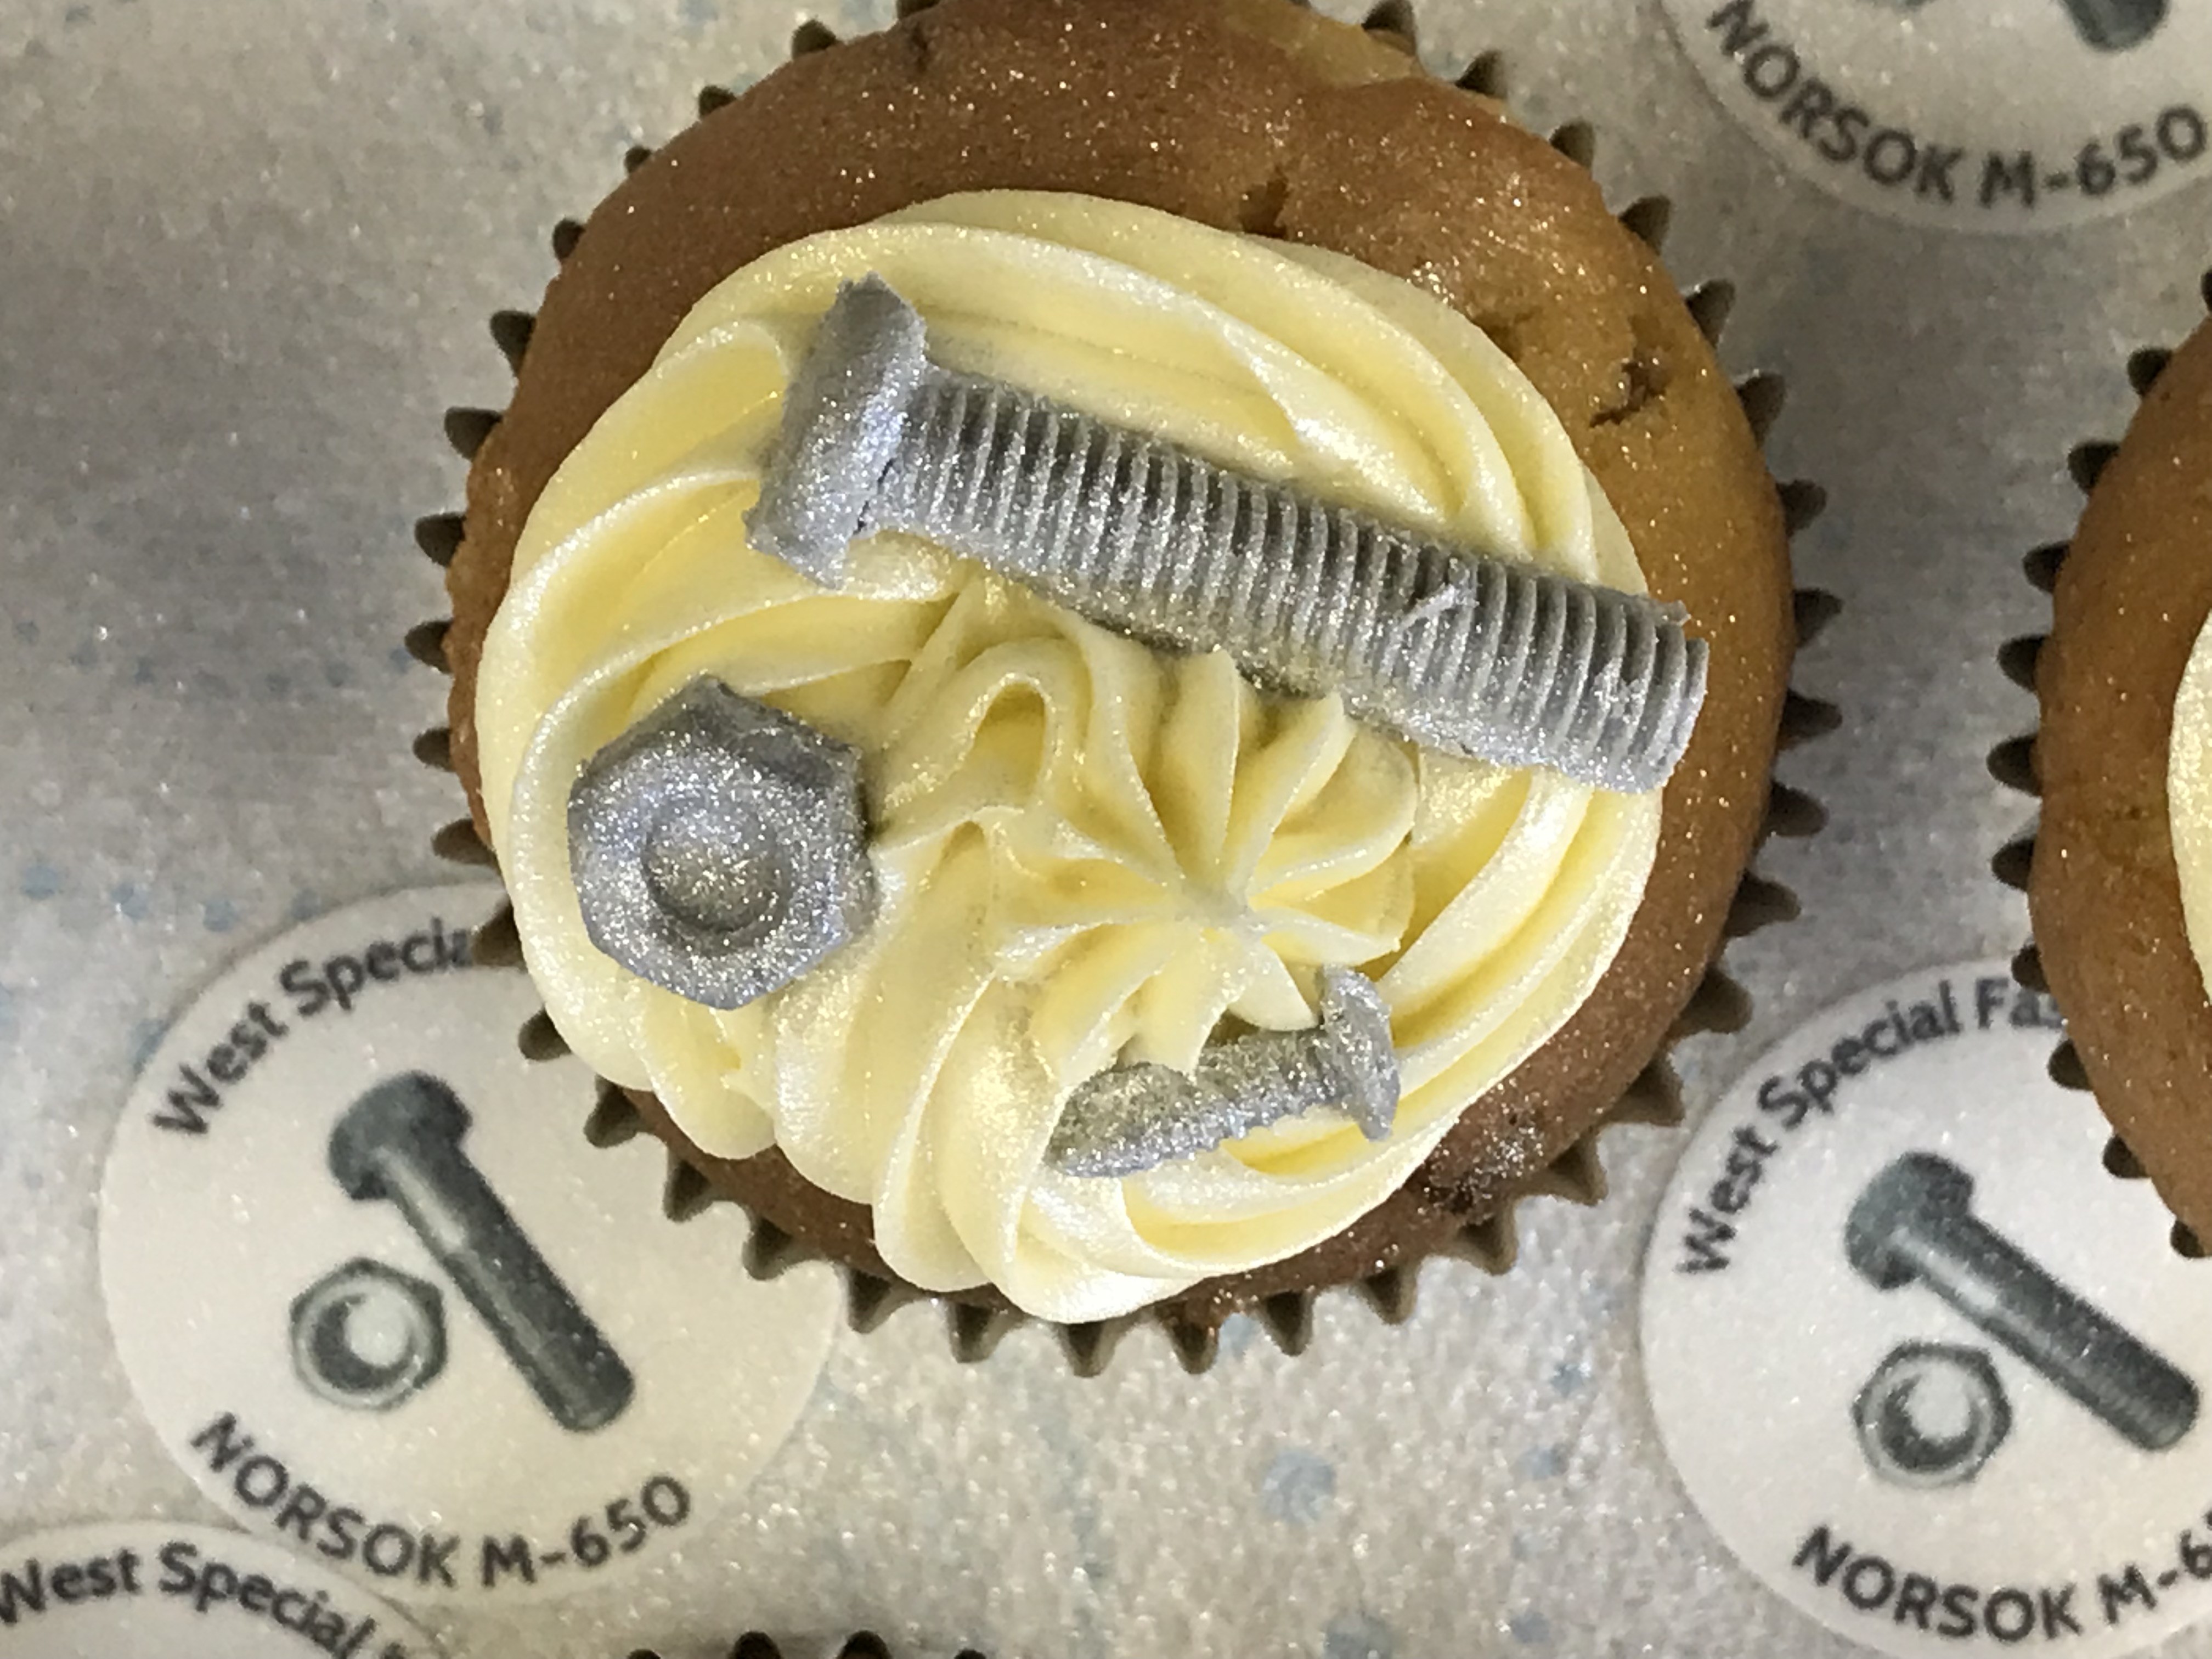 West Special Fasteners Ltd are the first to recieve CMSM certification and they celebrated with some specially-made cakes.